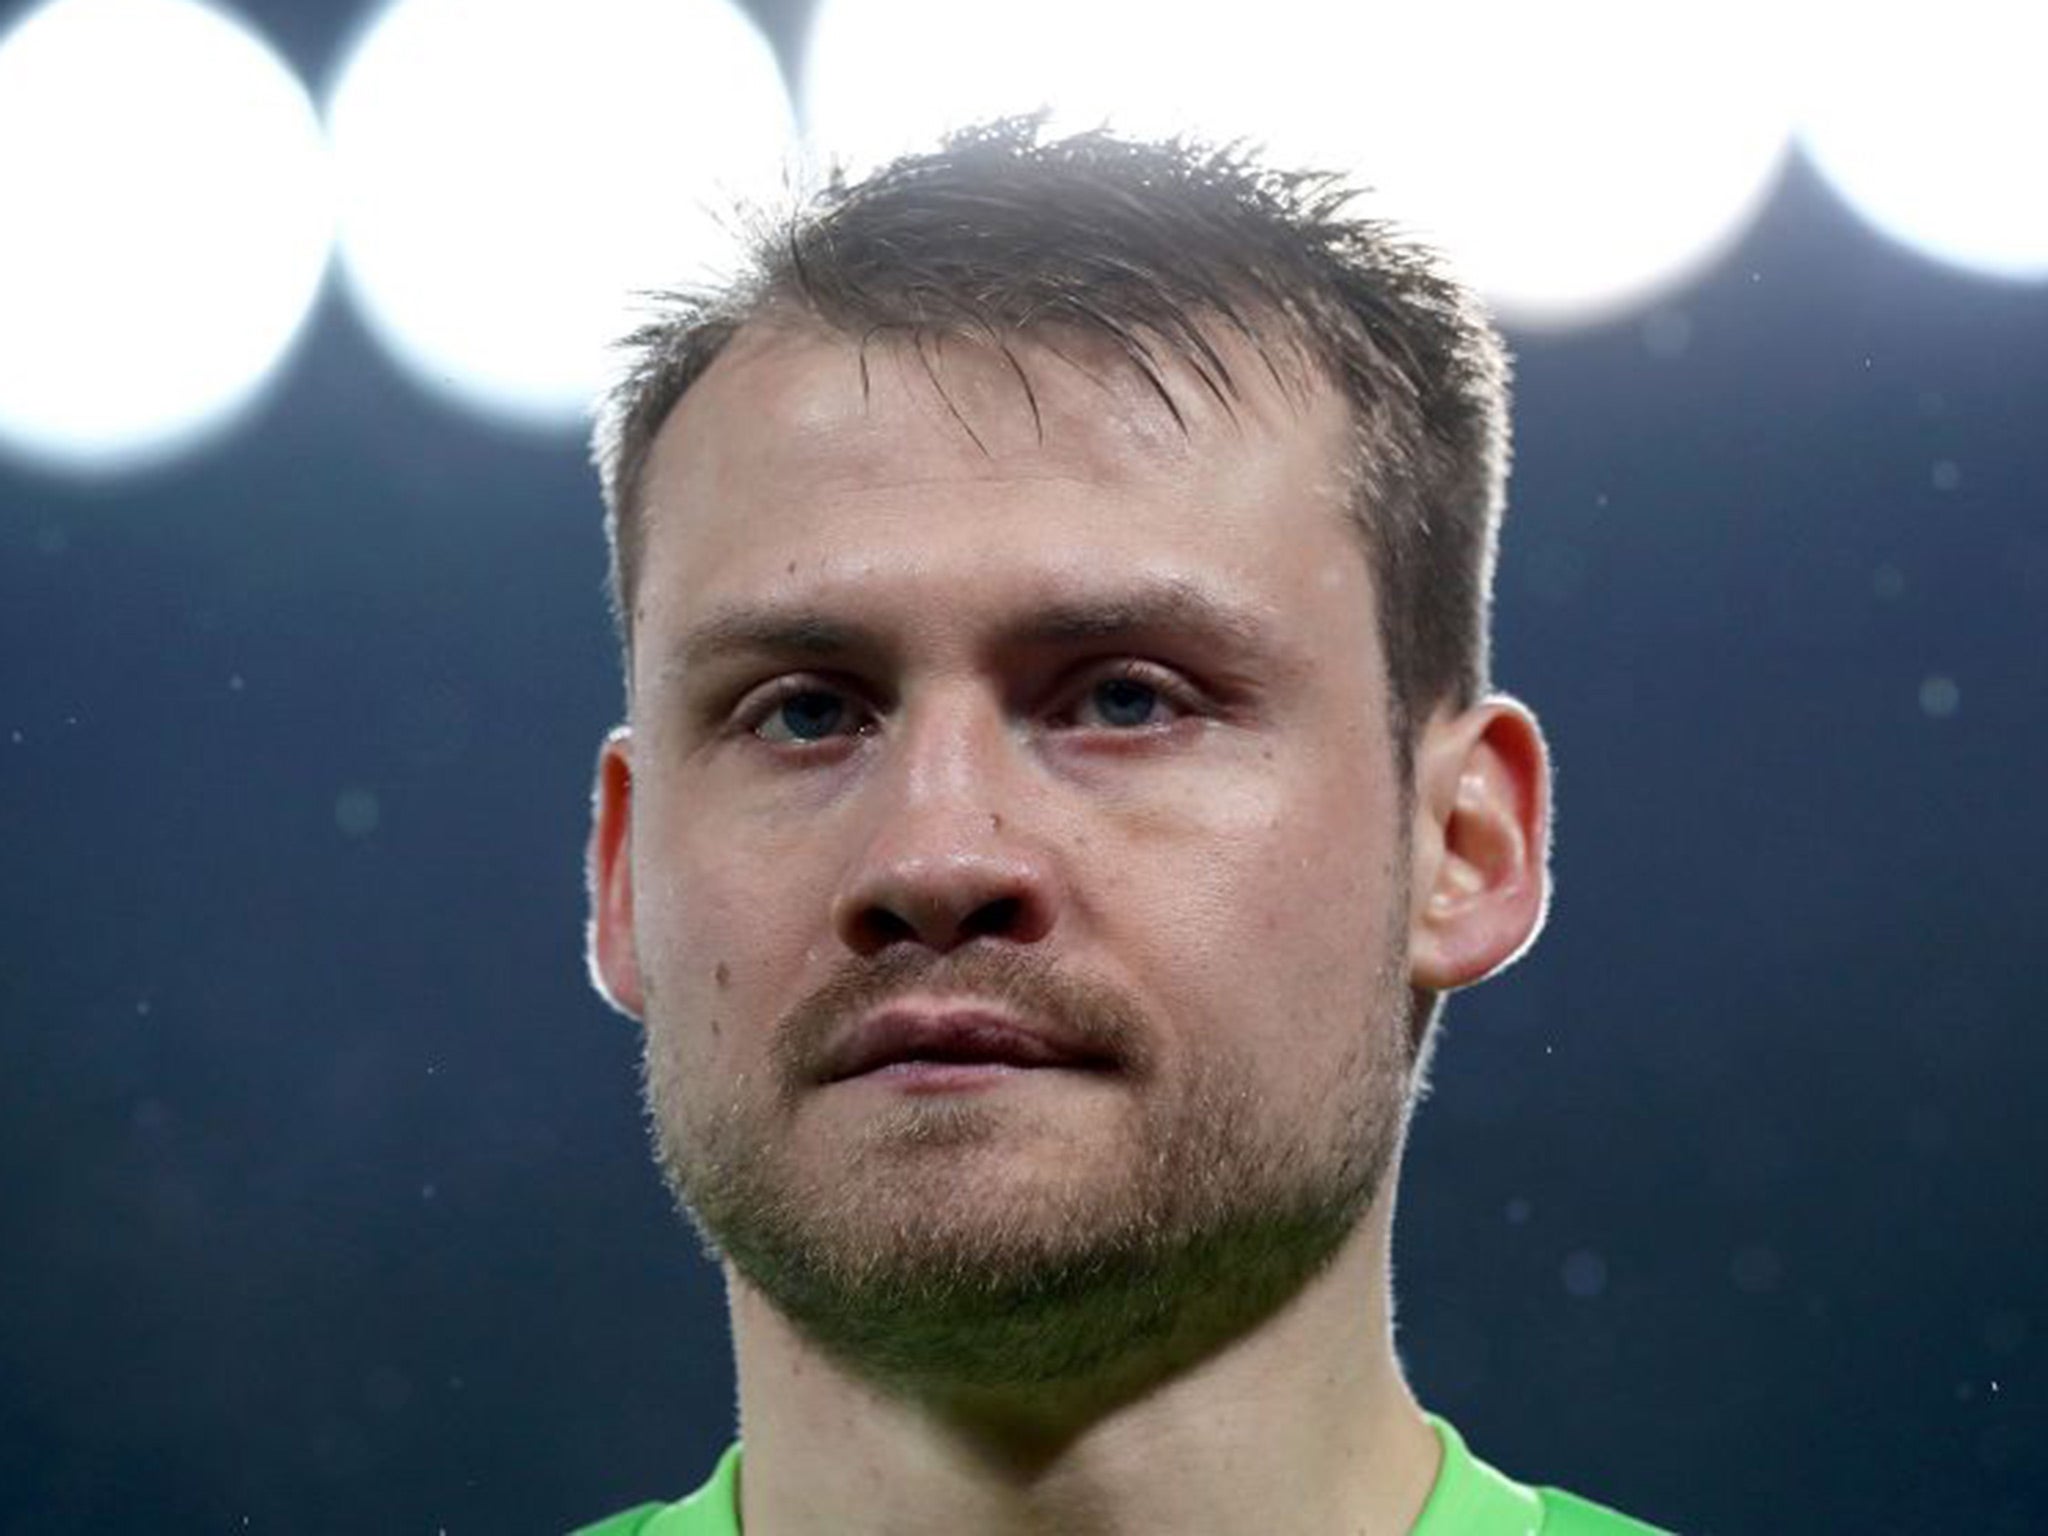 Simon Mignolet atoned for his part in Chelsea's goal by saving a late Diego Costa penalty